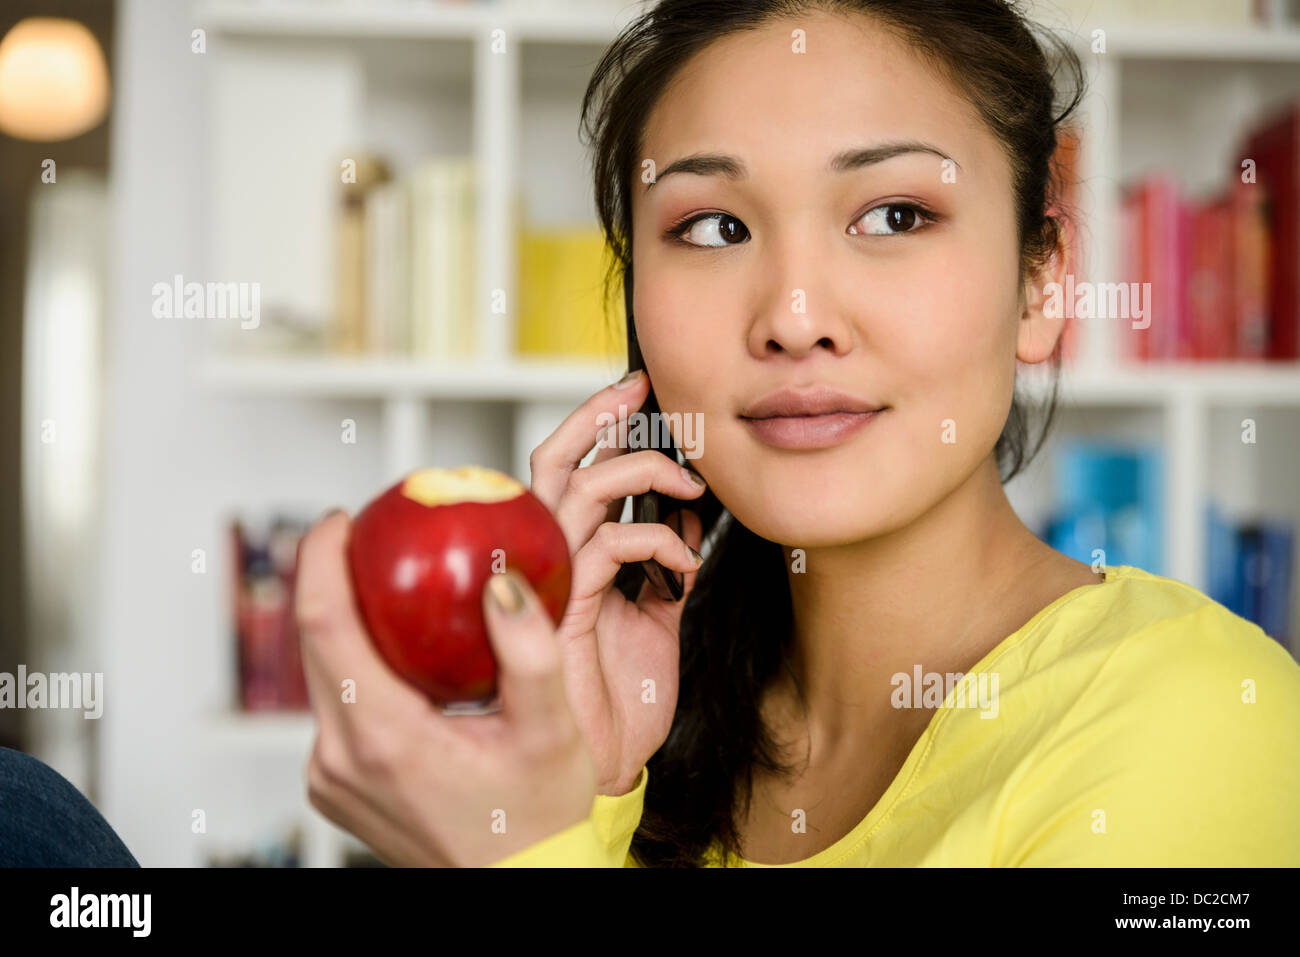 Woman with red apple listening to mobile phone Stock Photo